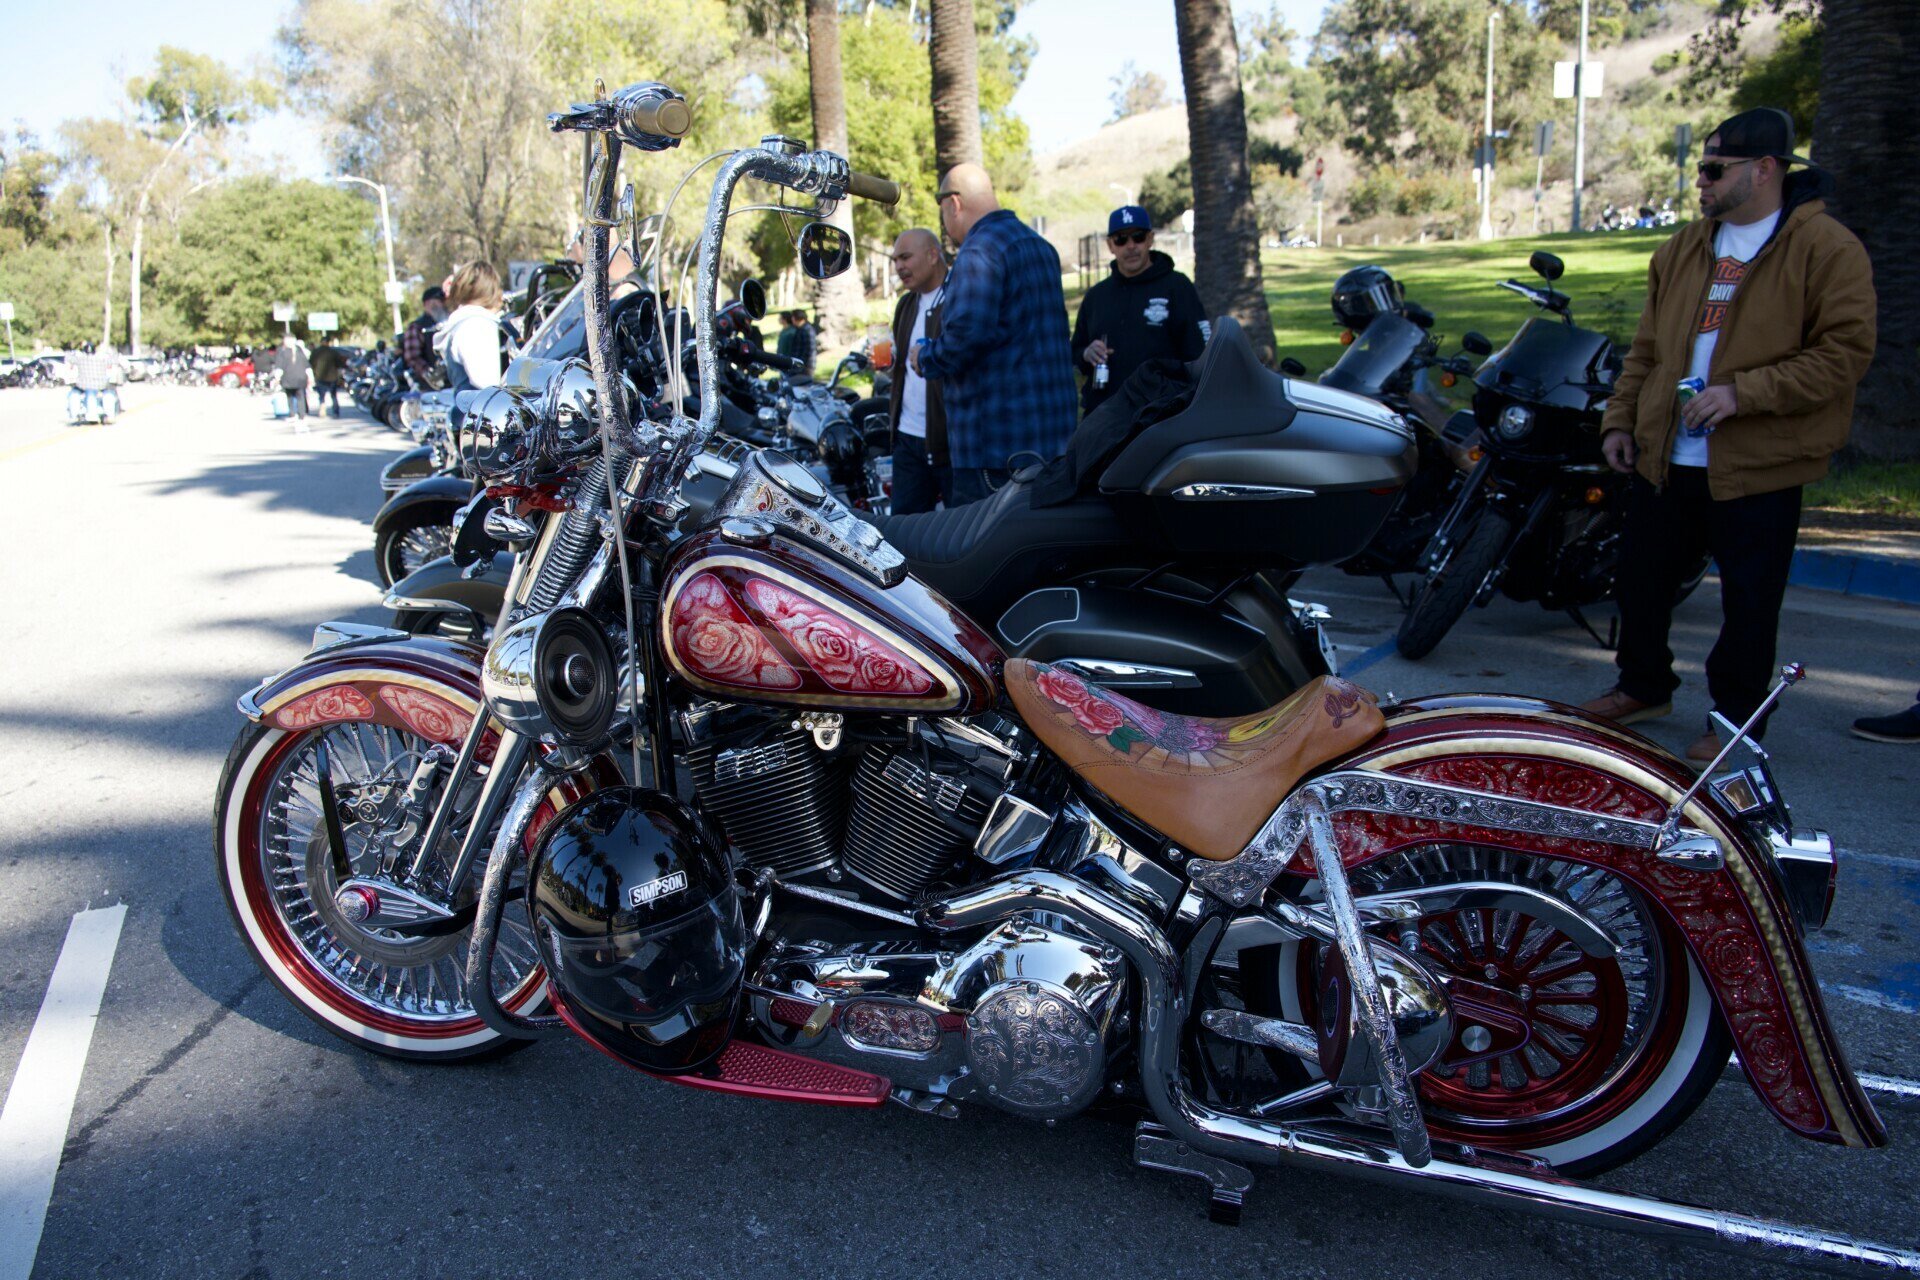 Custom-designed chopper motorcycle with intricate patterns and chrome detailing showcased at Elysian Park, LA